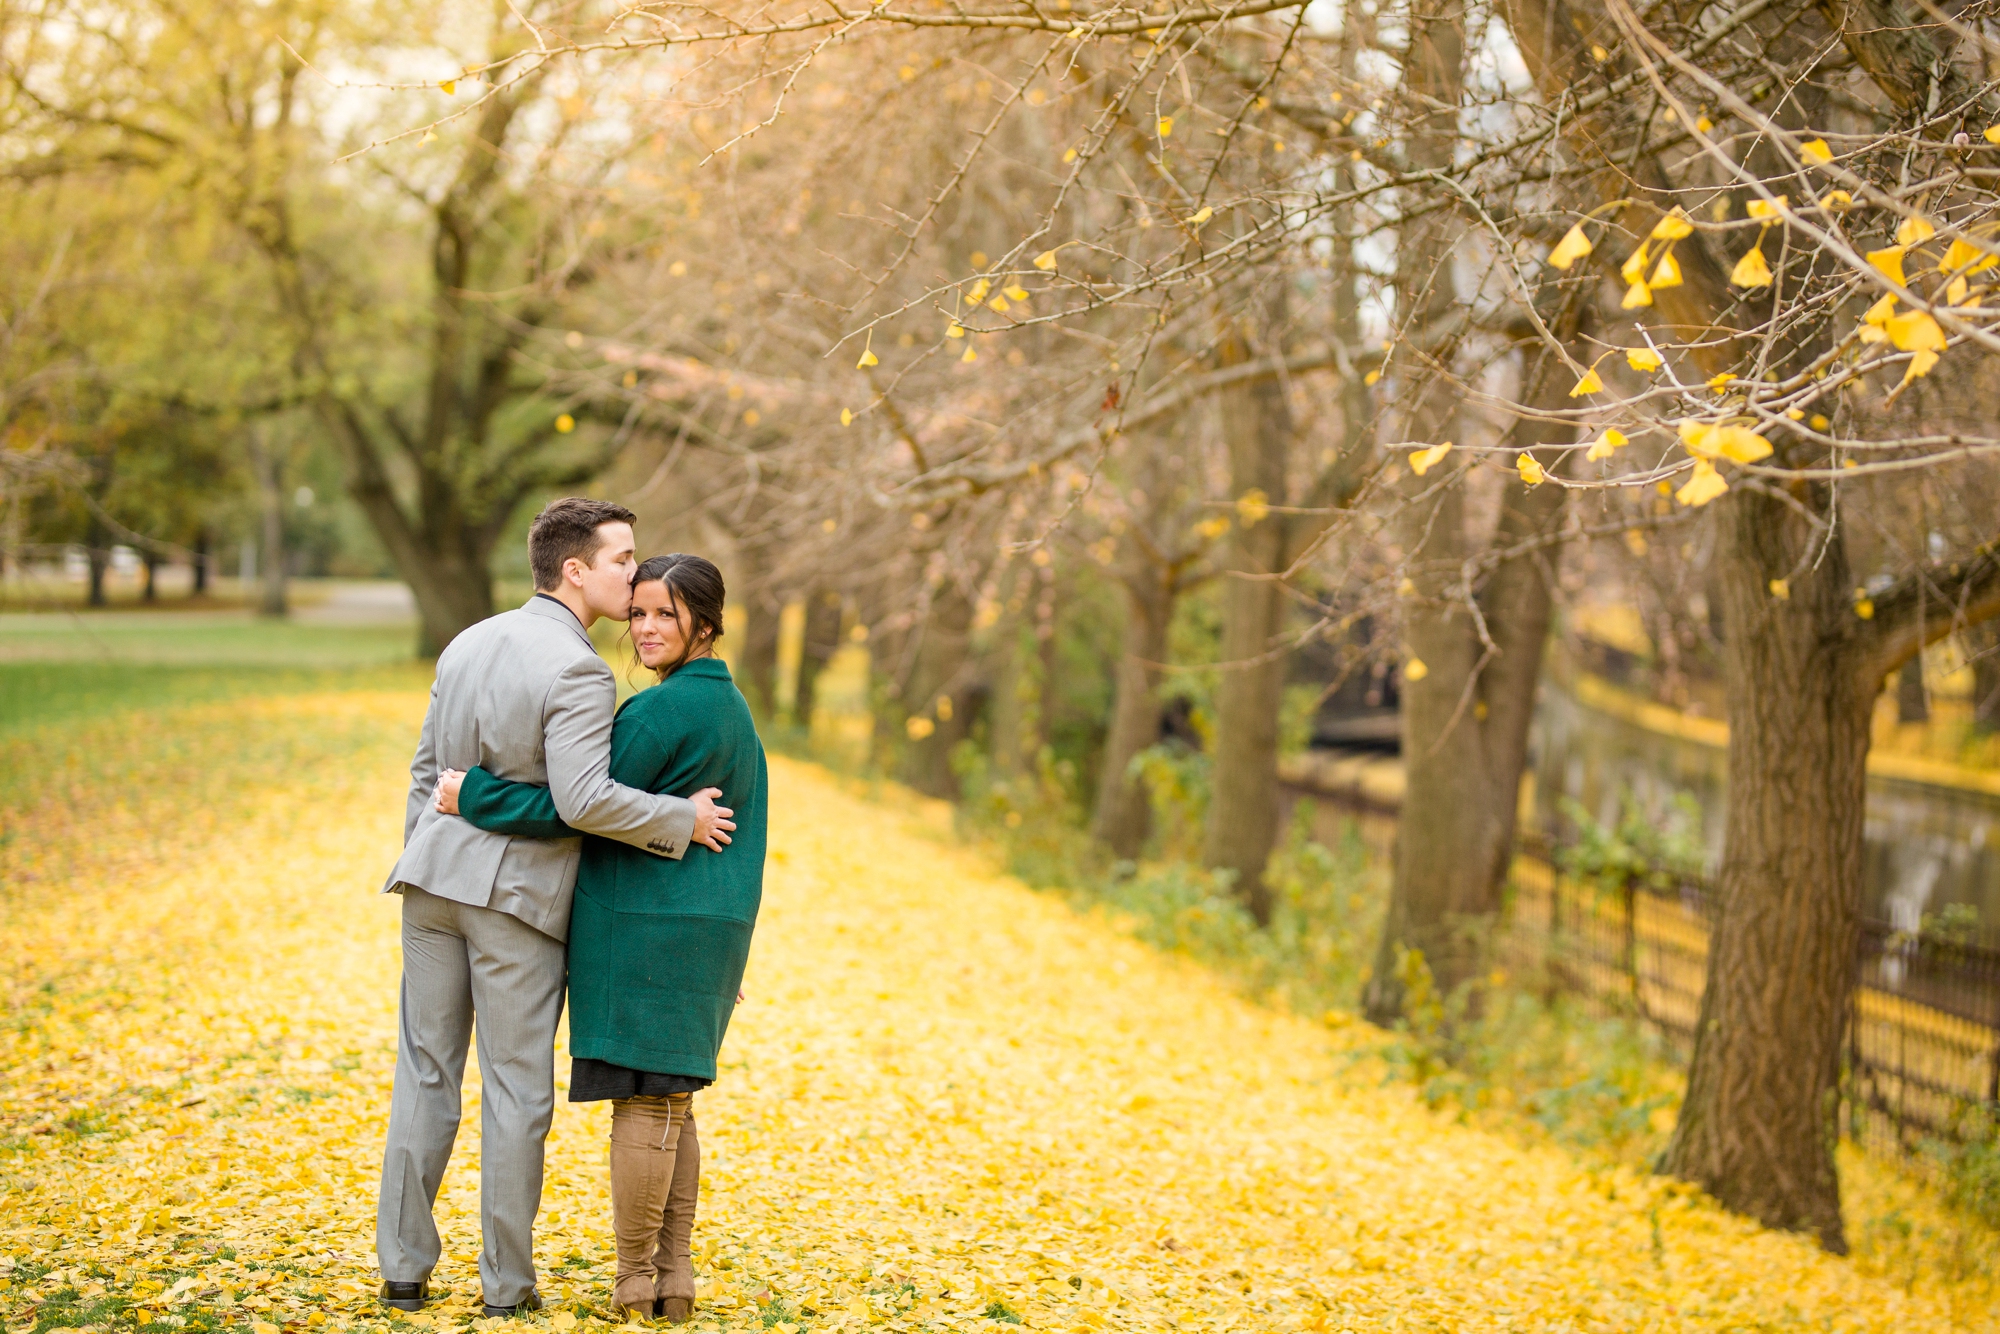 pittsburgh wedding photographer, pittsburgh engagement photos, best spot in pittsburgh for photo shoot, highland park engagement pictures, allegheny commons park engagement photos, mexican war street